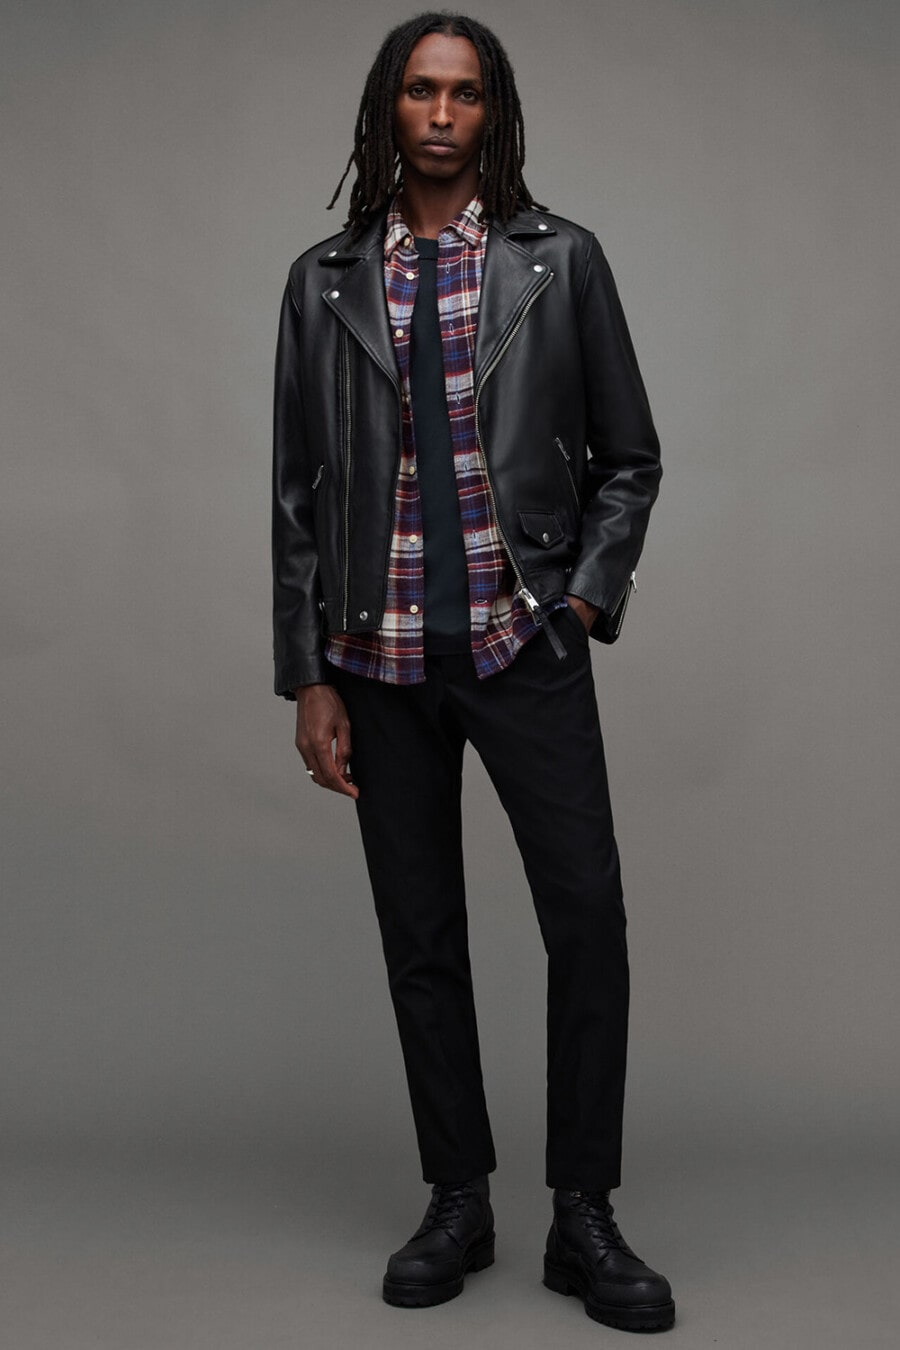 Men's black pants, charcoal T-shirt, red/blue check open shirt, black leather biker jacket and black boots grunge outfit